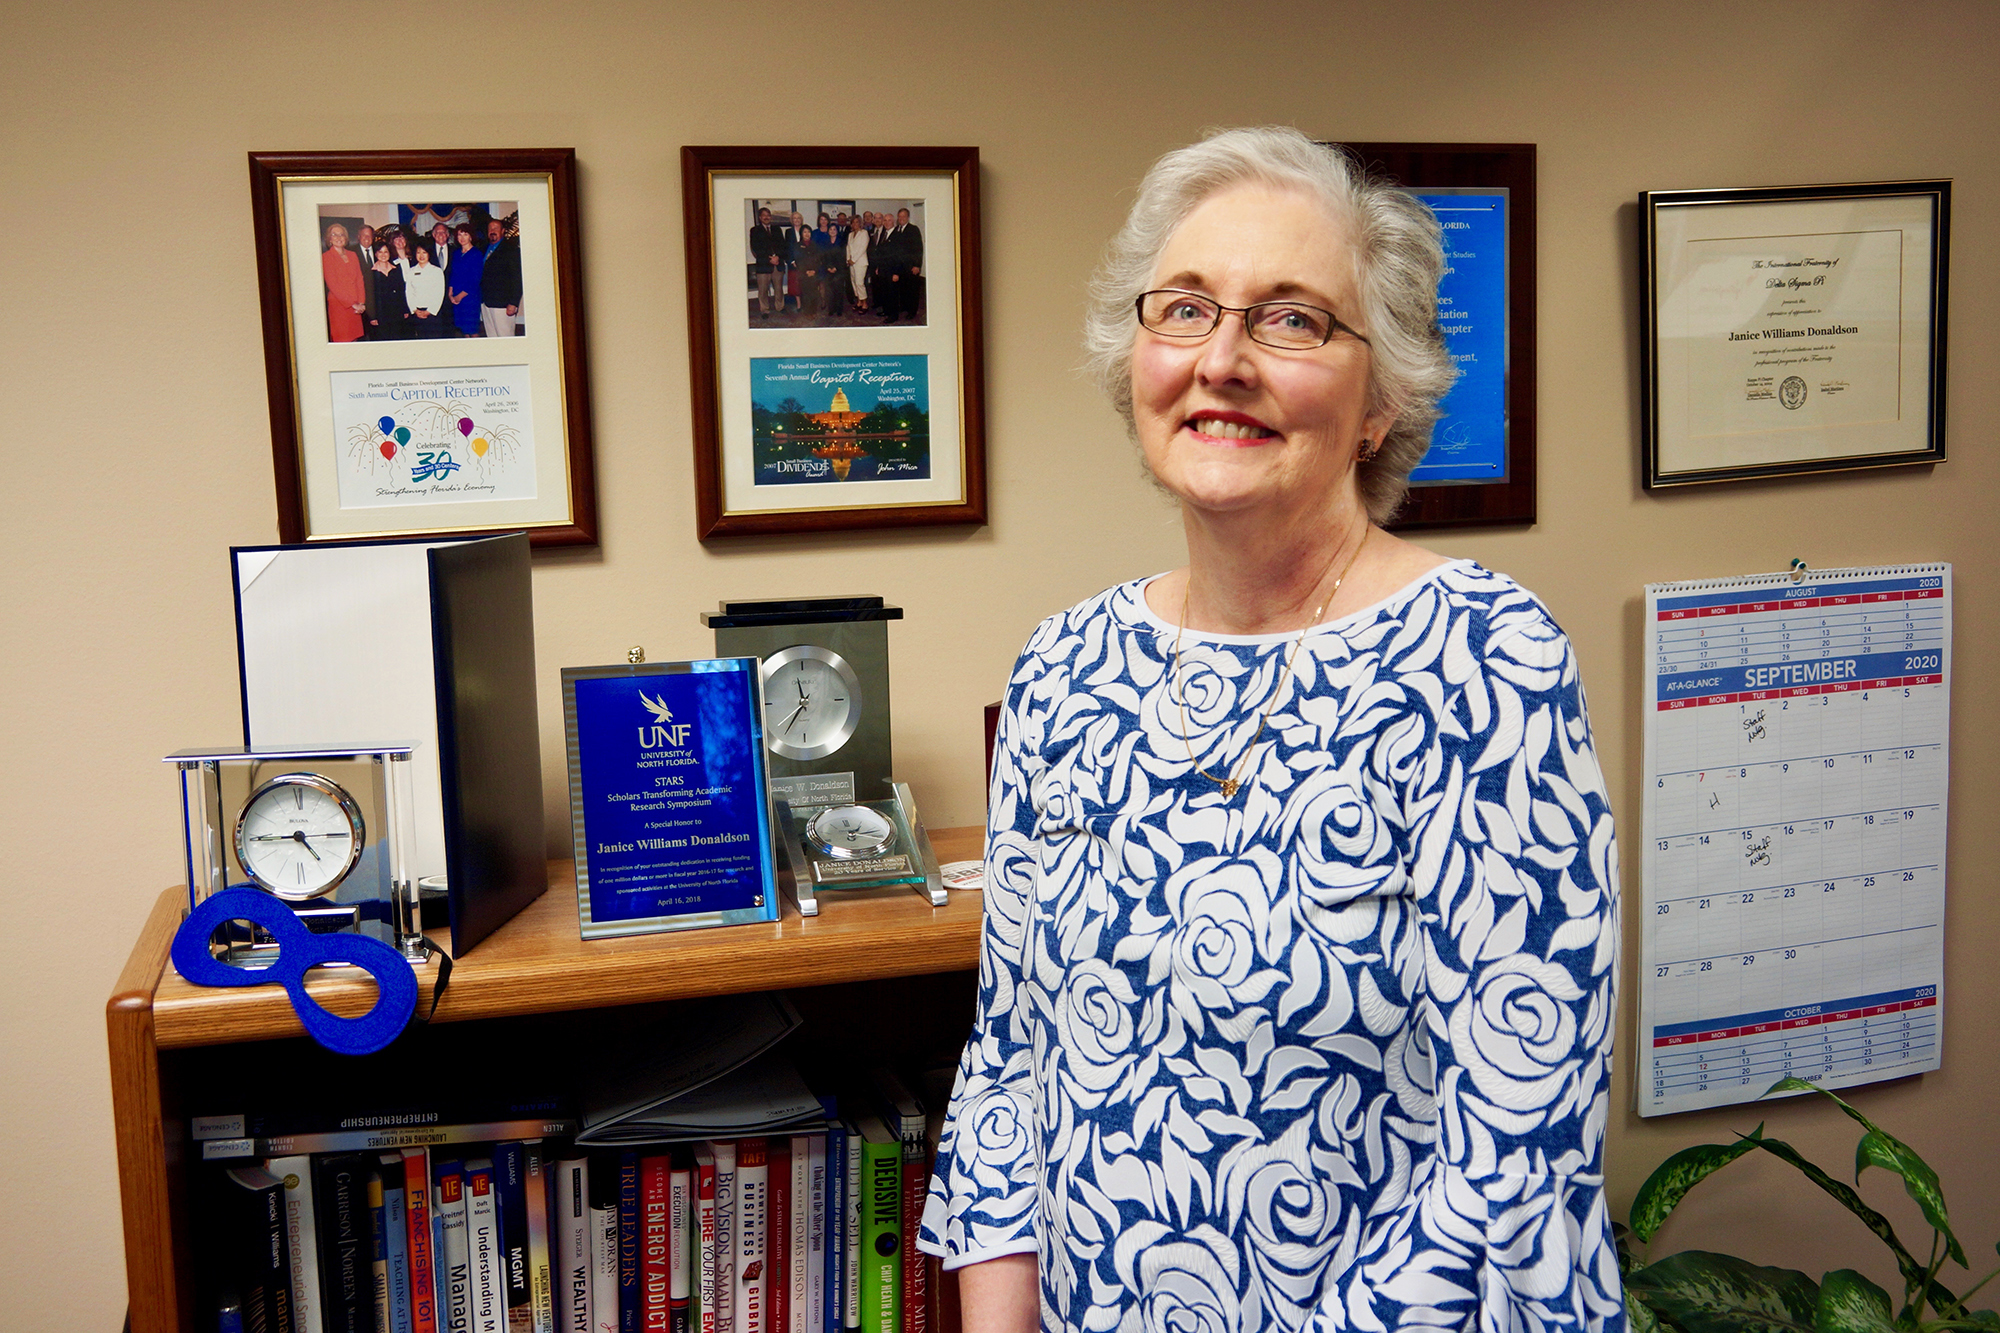 Janice Donaldson and her  2019 Millionaire Star Award. The annual award recognizes the department at the university that brings at least $1 million to UNF through contributions and grants.